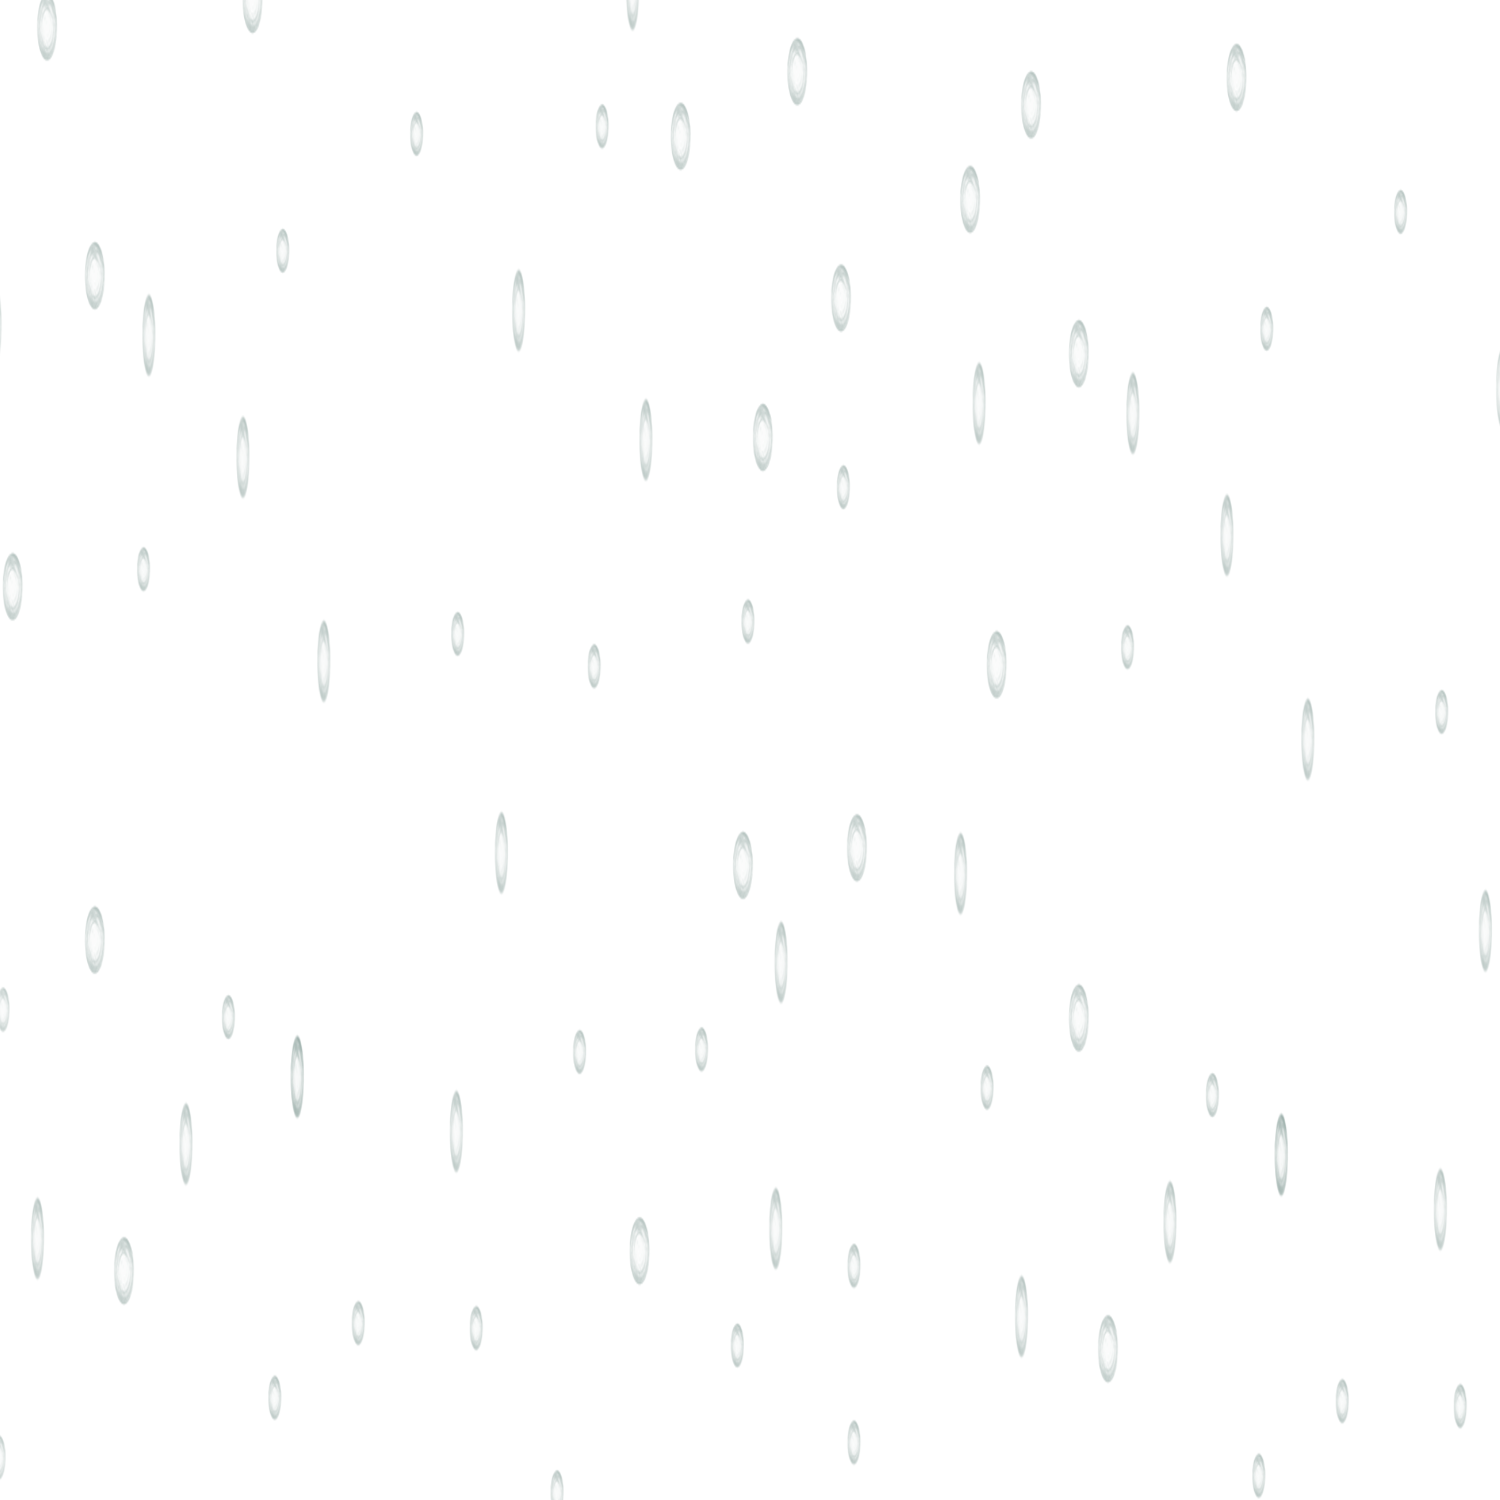 Water clipart raindrop. Rain png images free